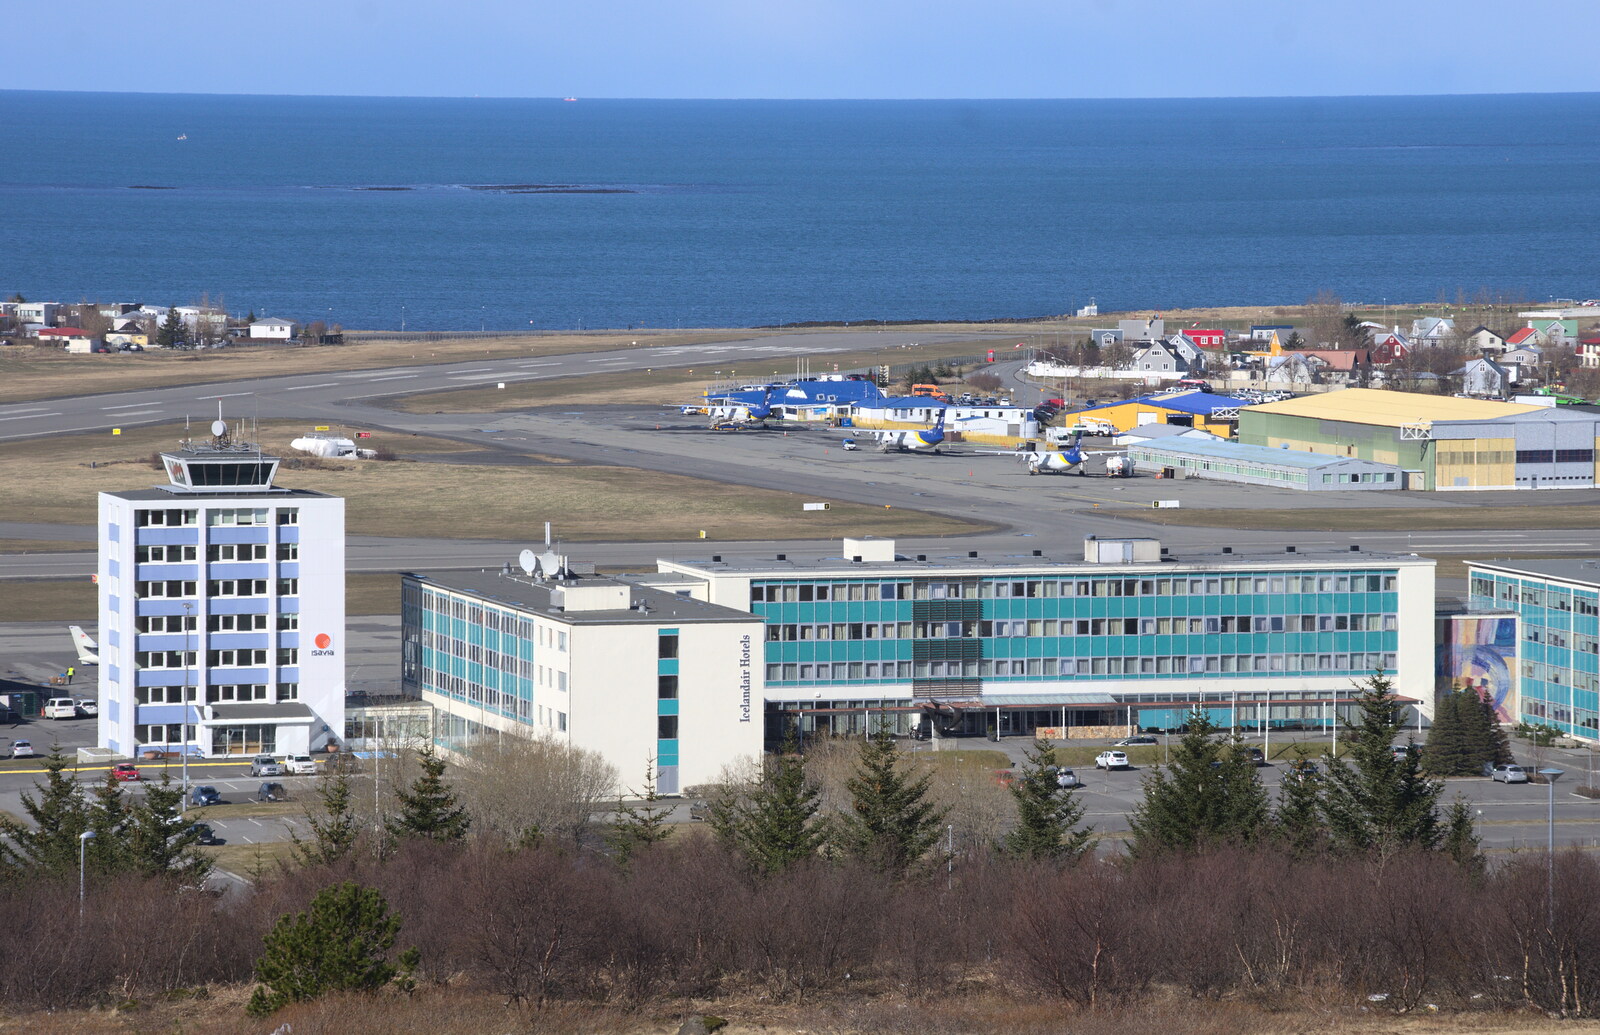 Another view of our hotel and the airport from Stríðsminjar War Relics, Perlan and Street Art, Reykjavik, Iceland - 23rd April 2017